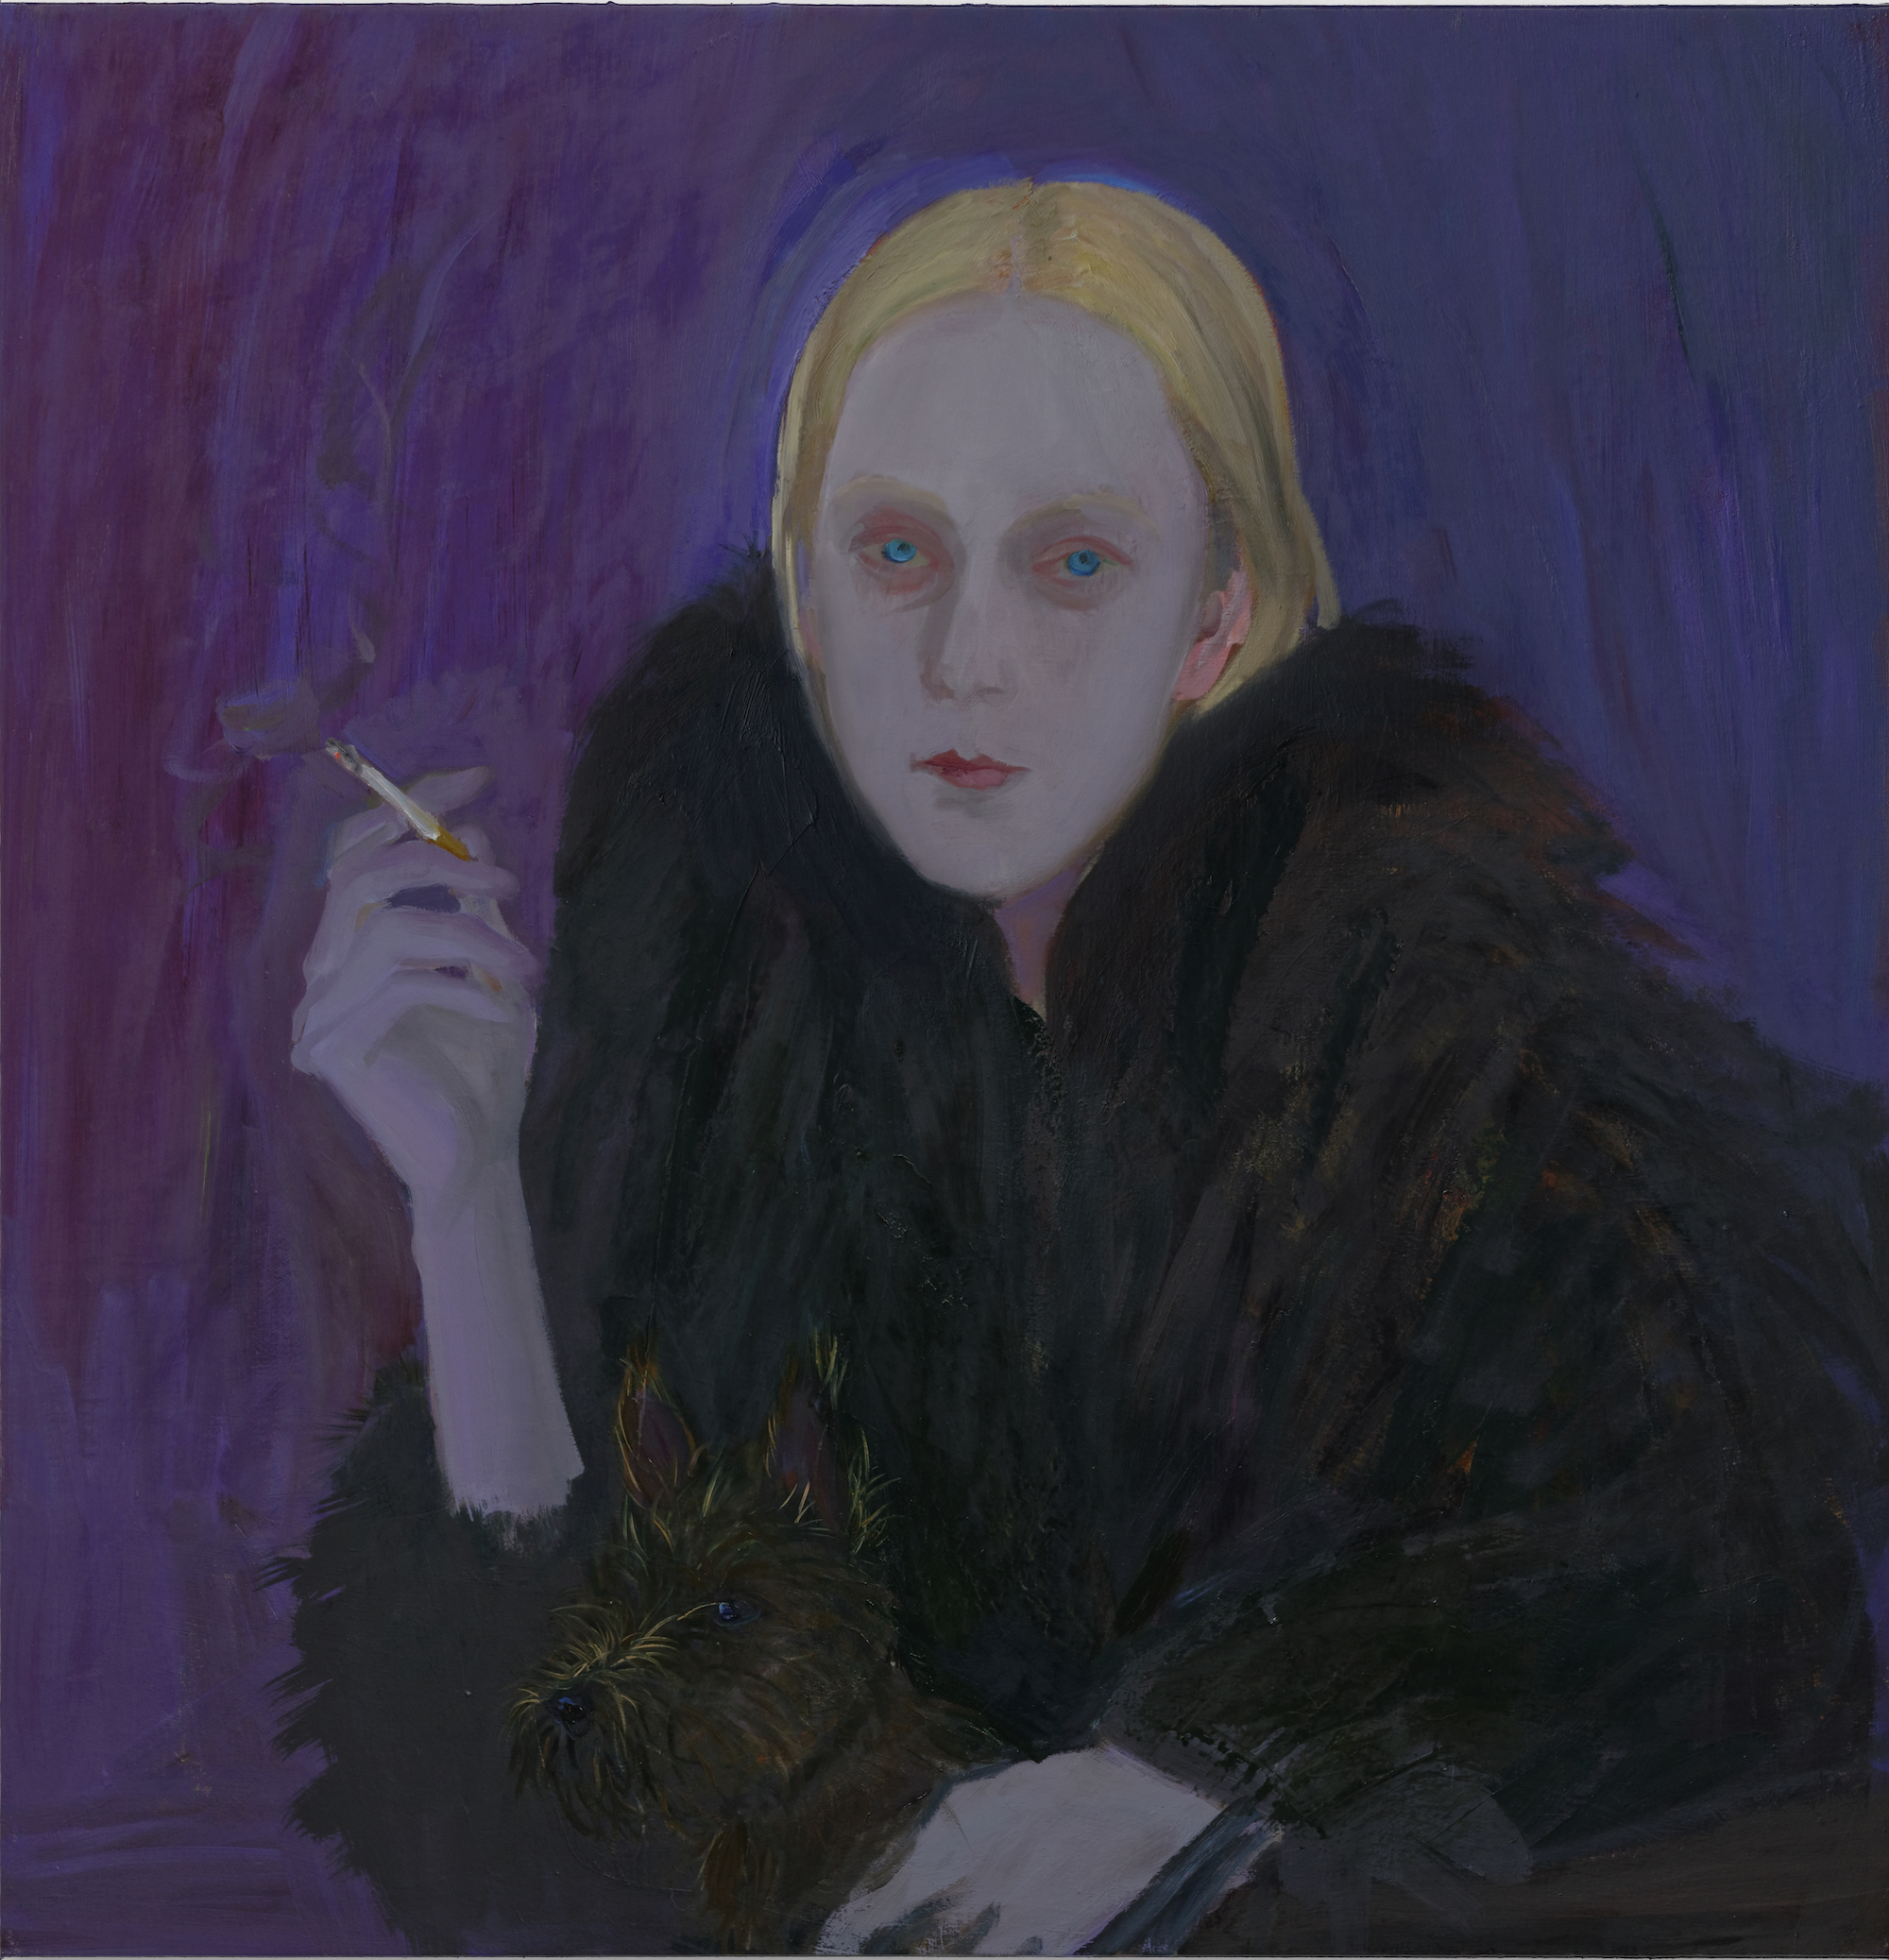 A painting of a woman in a fur coat smoking by Xinyi Cheng